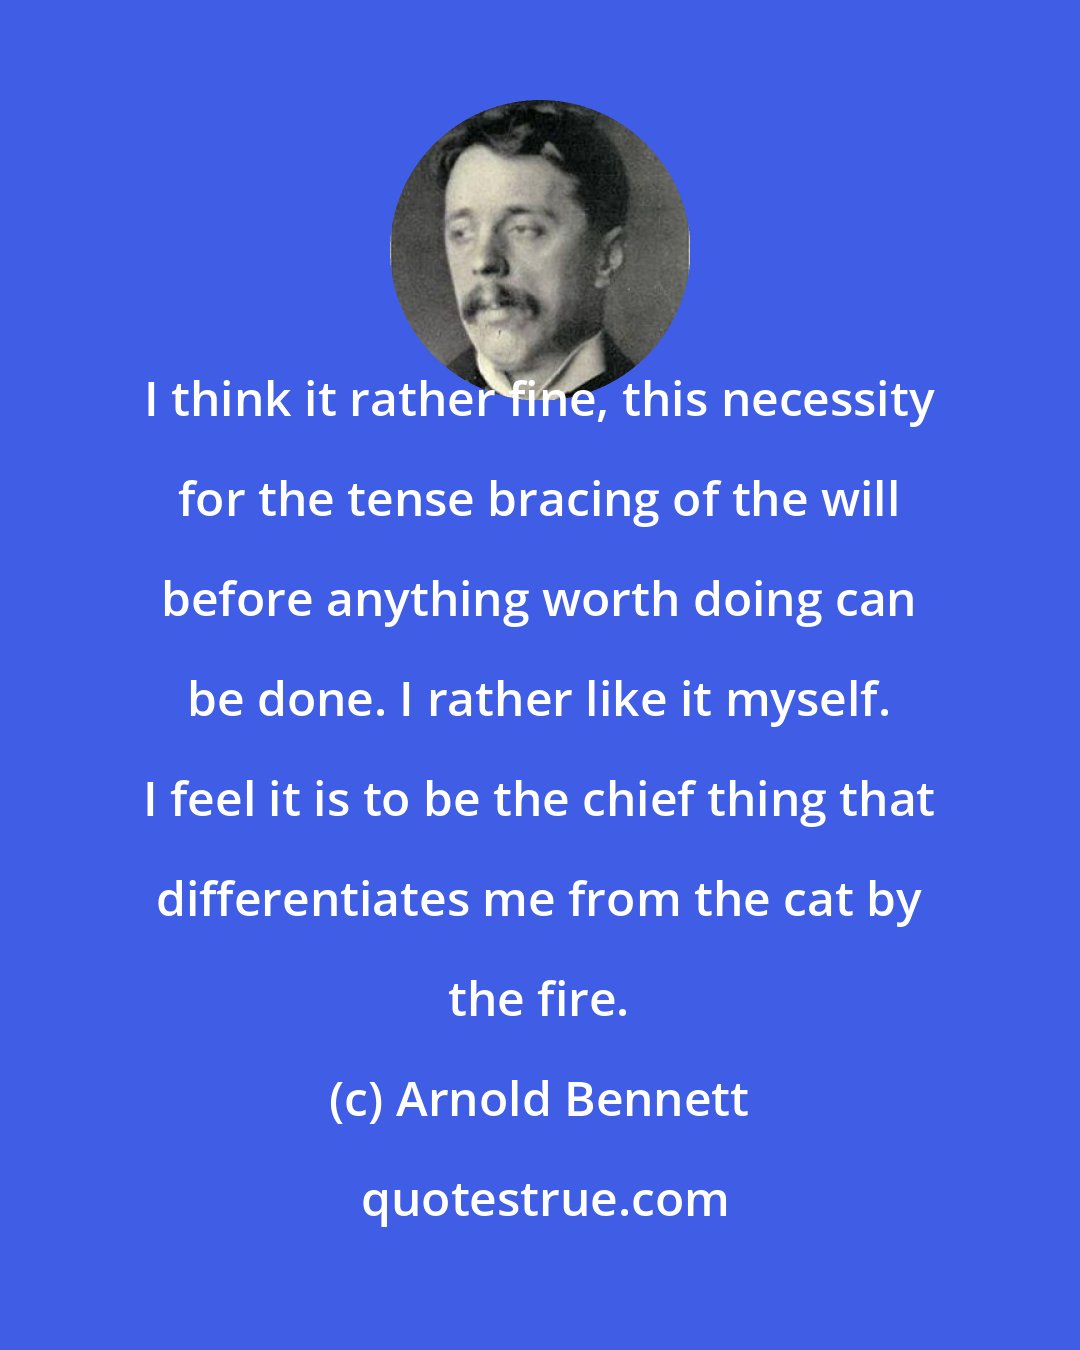 Arnold Bennett: I think it rather fine, this necessity for the tense bracing of the will before anything worth doing can be done. I rather like it myself. I feel it is to be the chief thing that differentiates me from the cat by the fire.